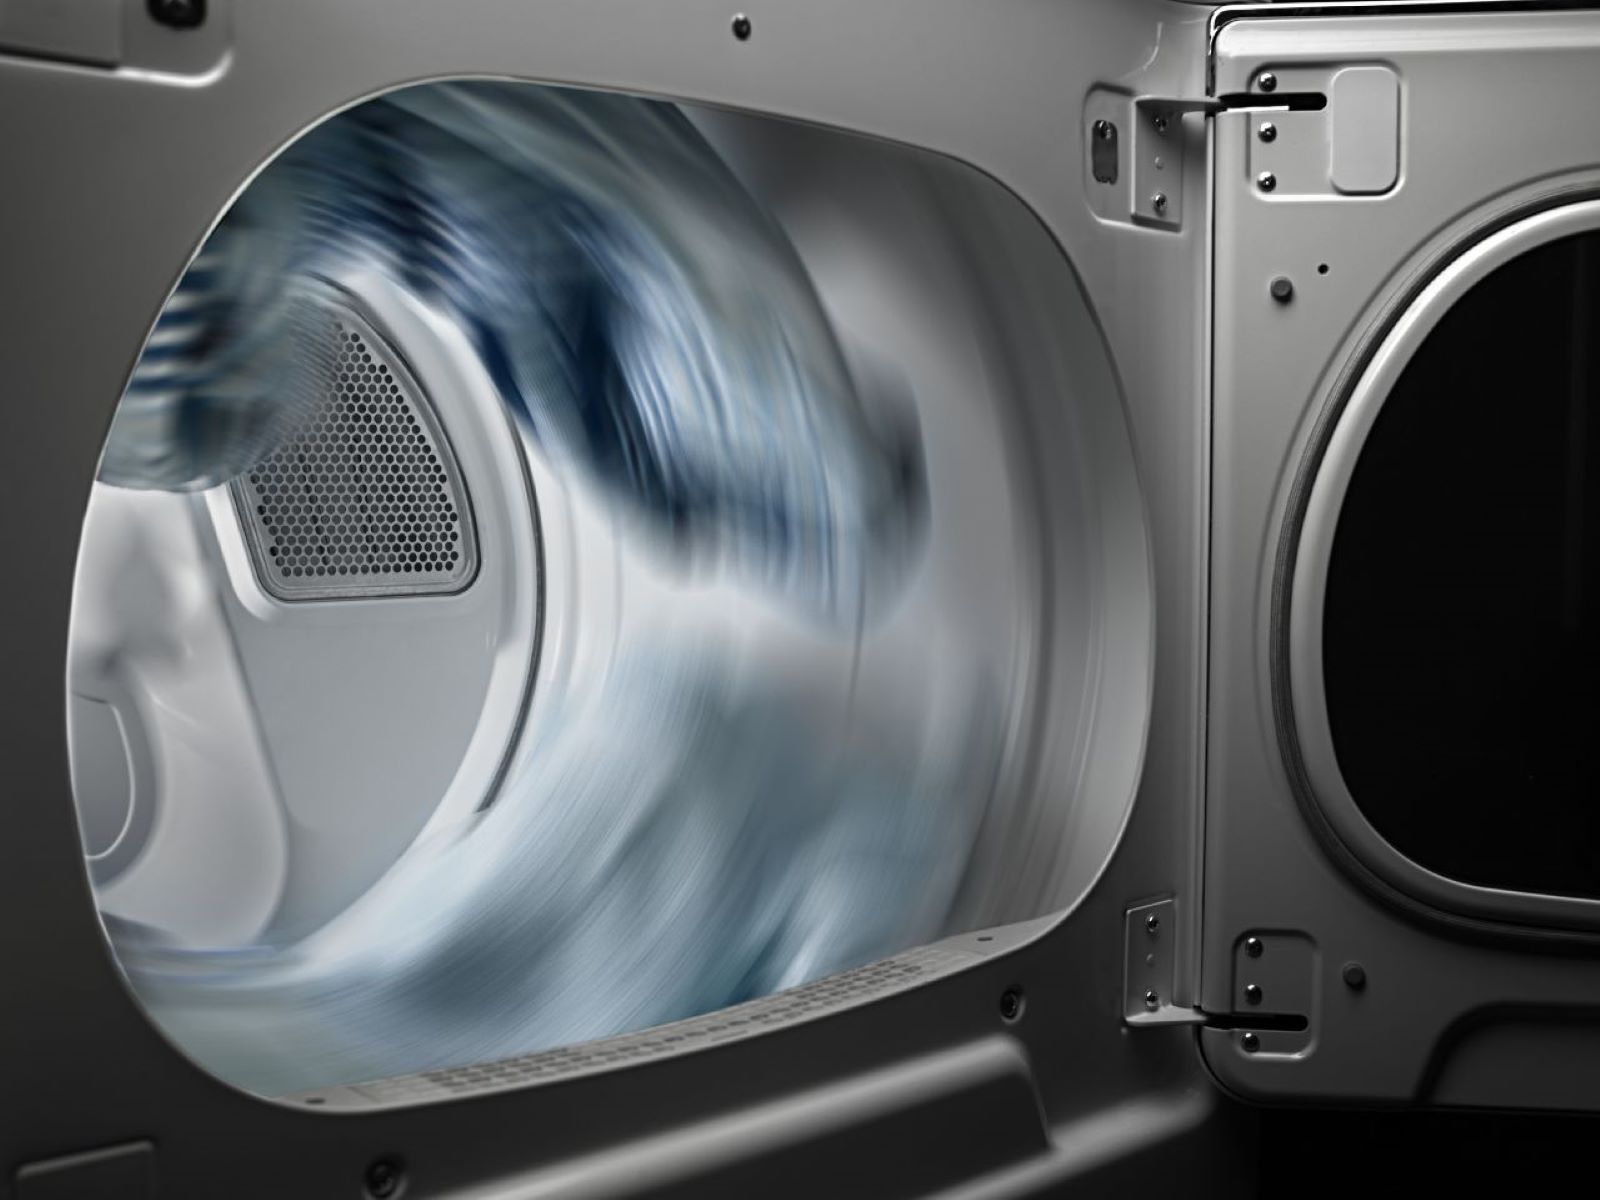 How To Fix The Error Code F86 For Whirlpool Dryer